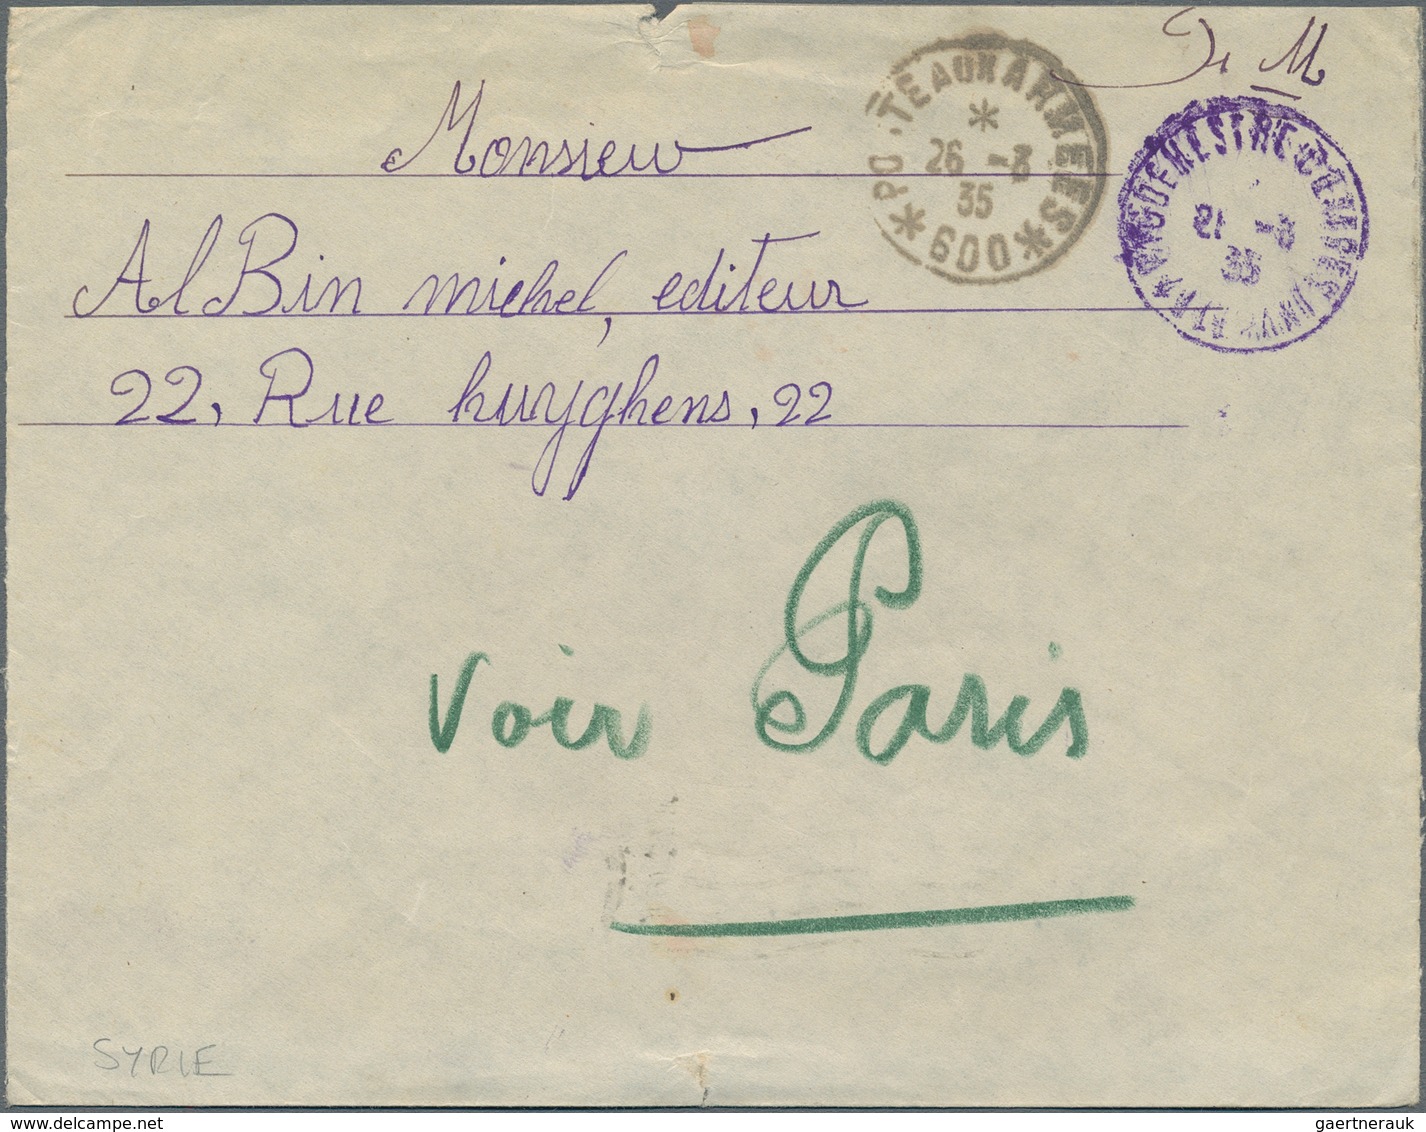 Syrien: 1923, French Military mail five covers tied by "TRESOR ET POSTES 600A - 3/8/23" cds., "T.E.P